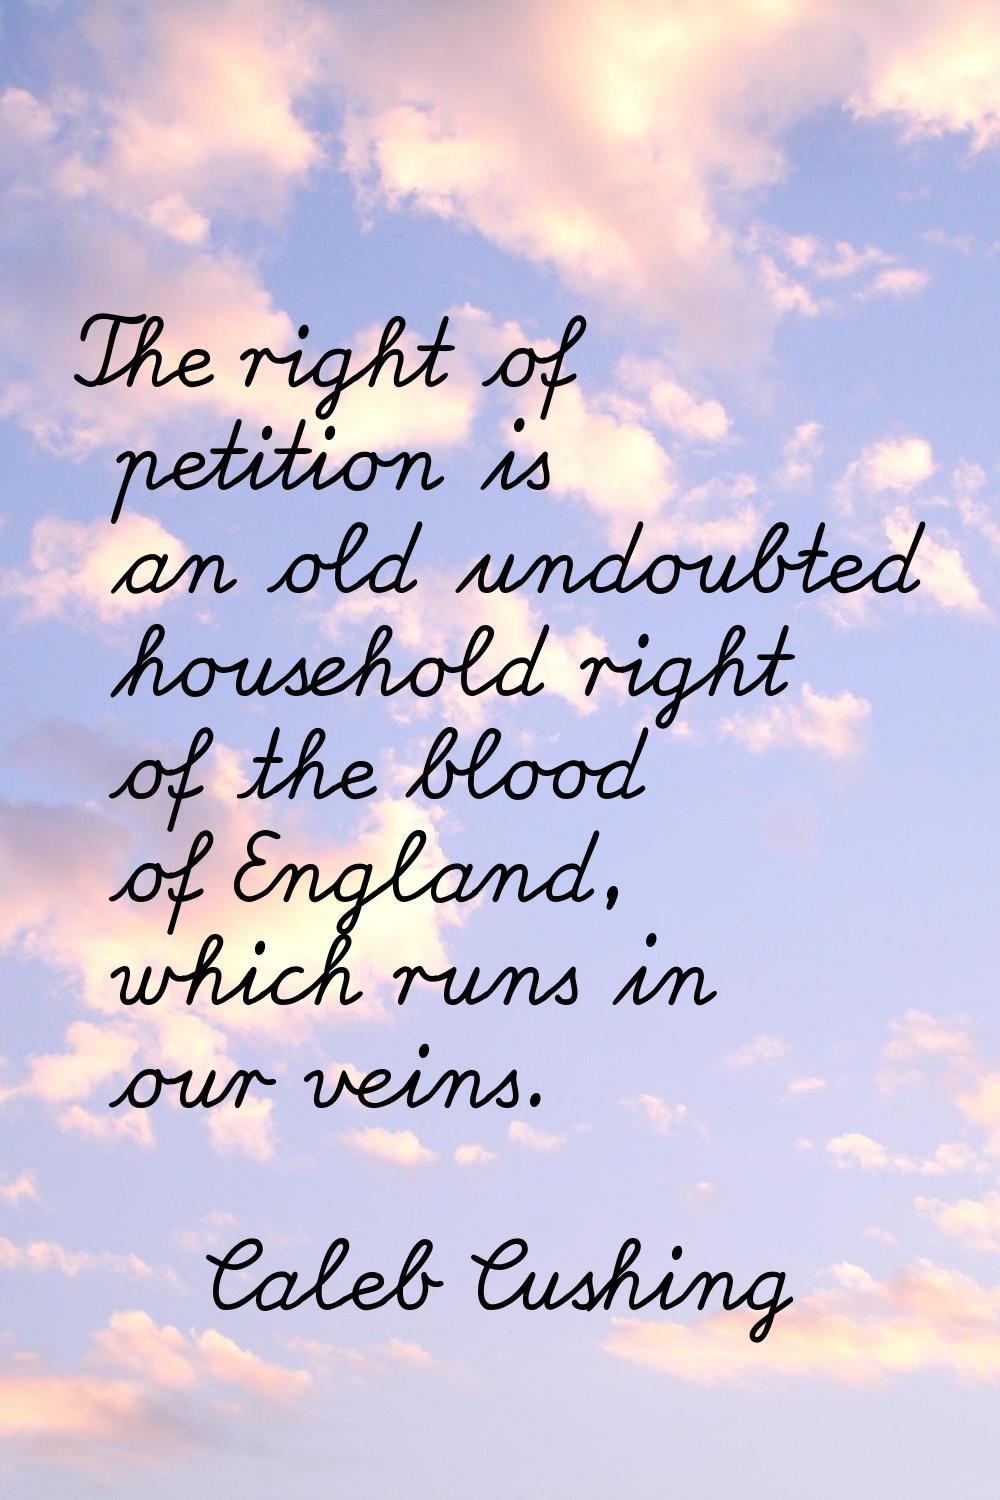 The right of petition is an old undoubted household right of the blood of England, which runs in ou